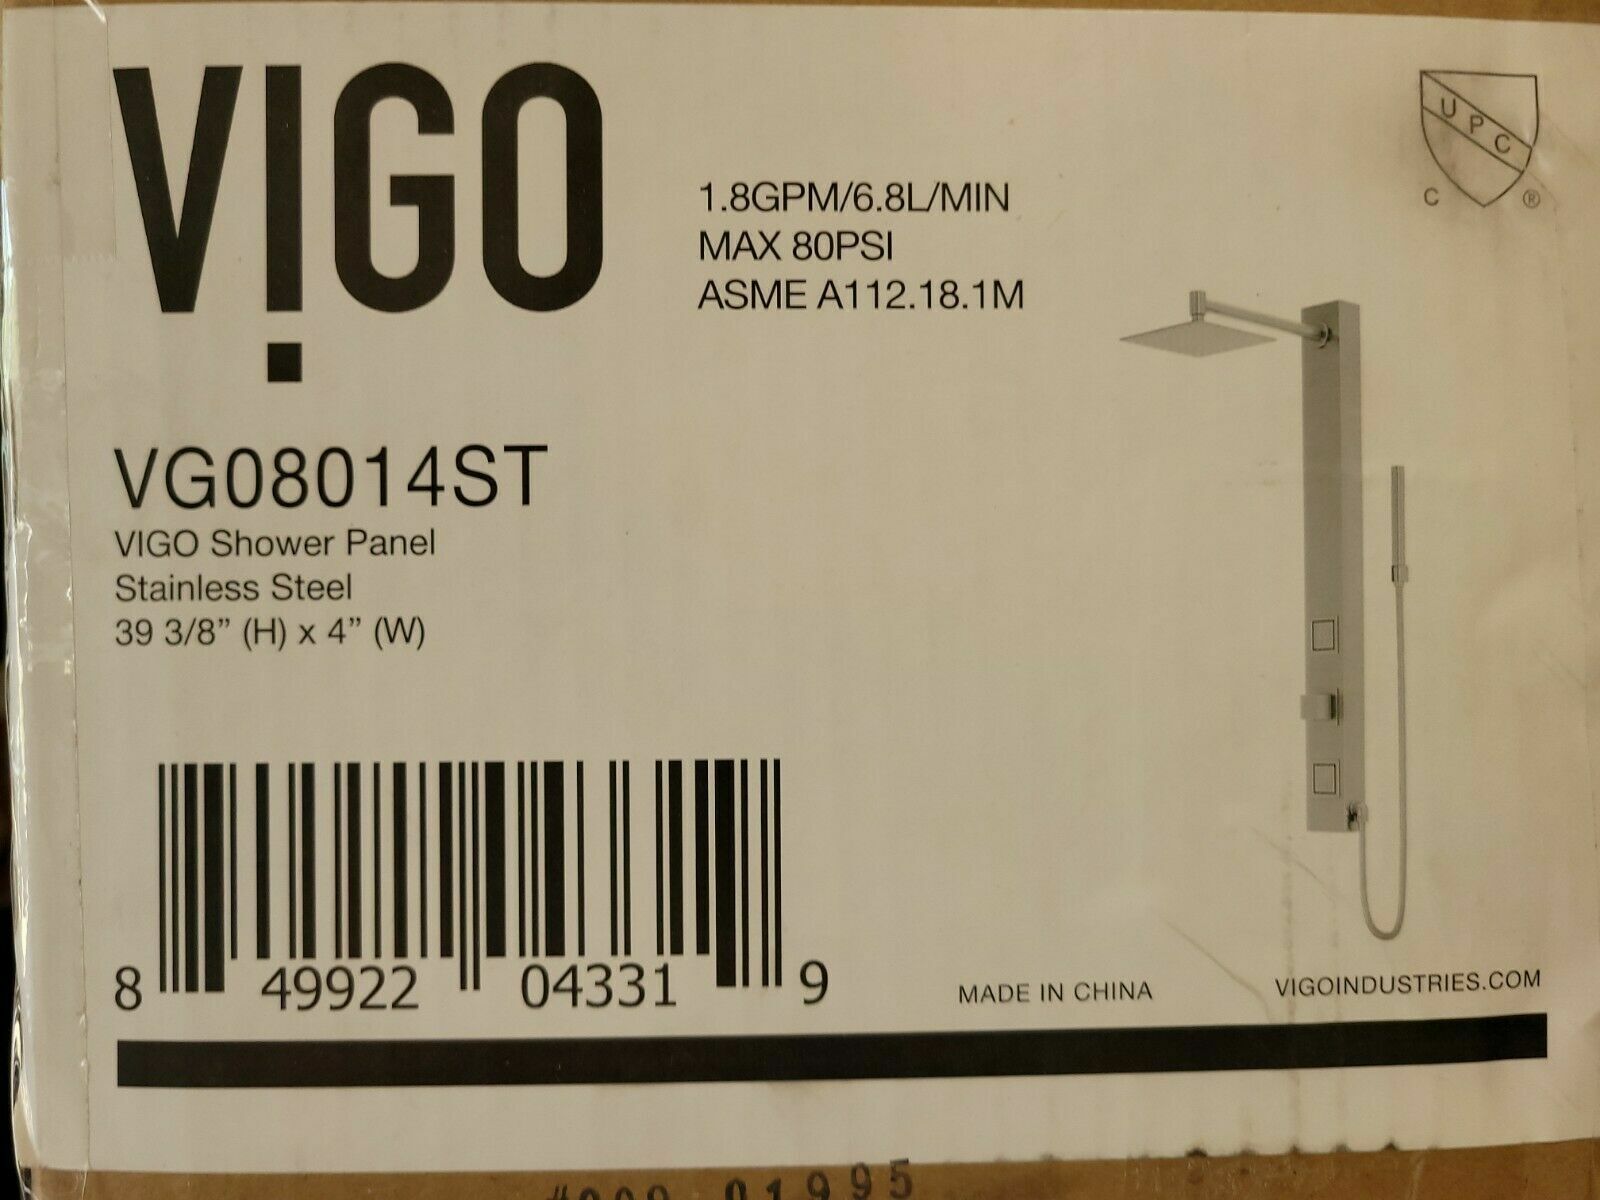 Vigo Orchid Vg08014st 2-jet Shower System With Rainhead & Handheld In Stainless